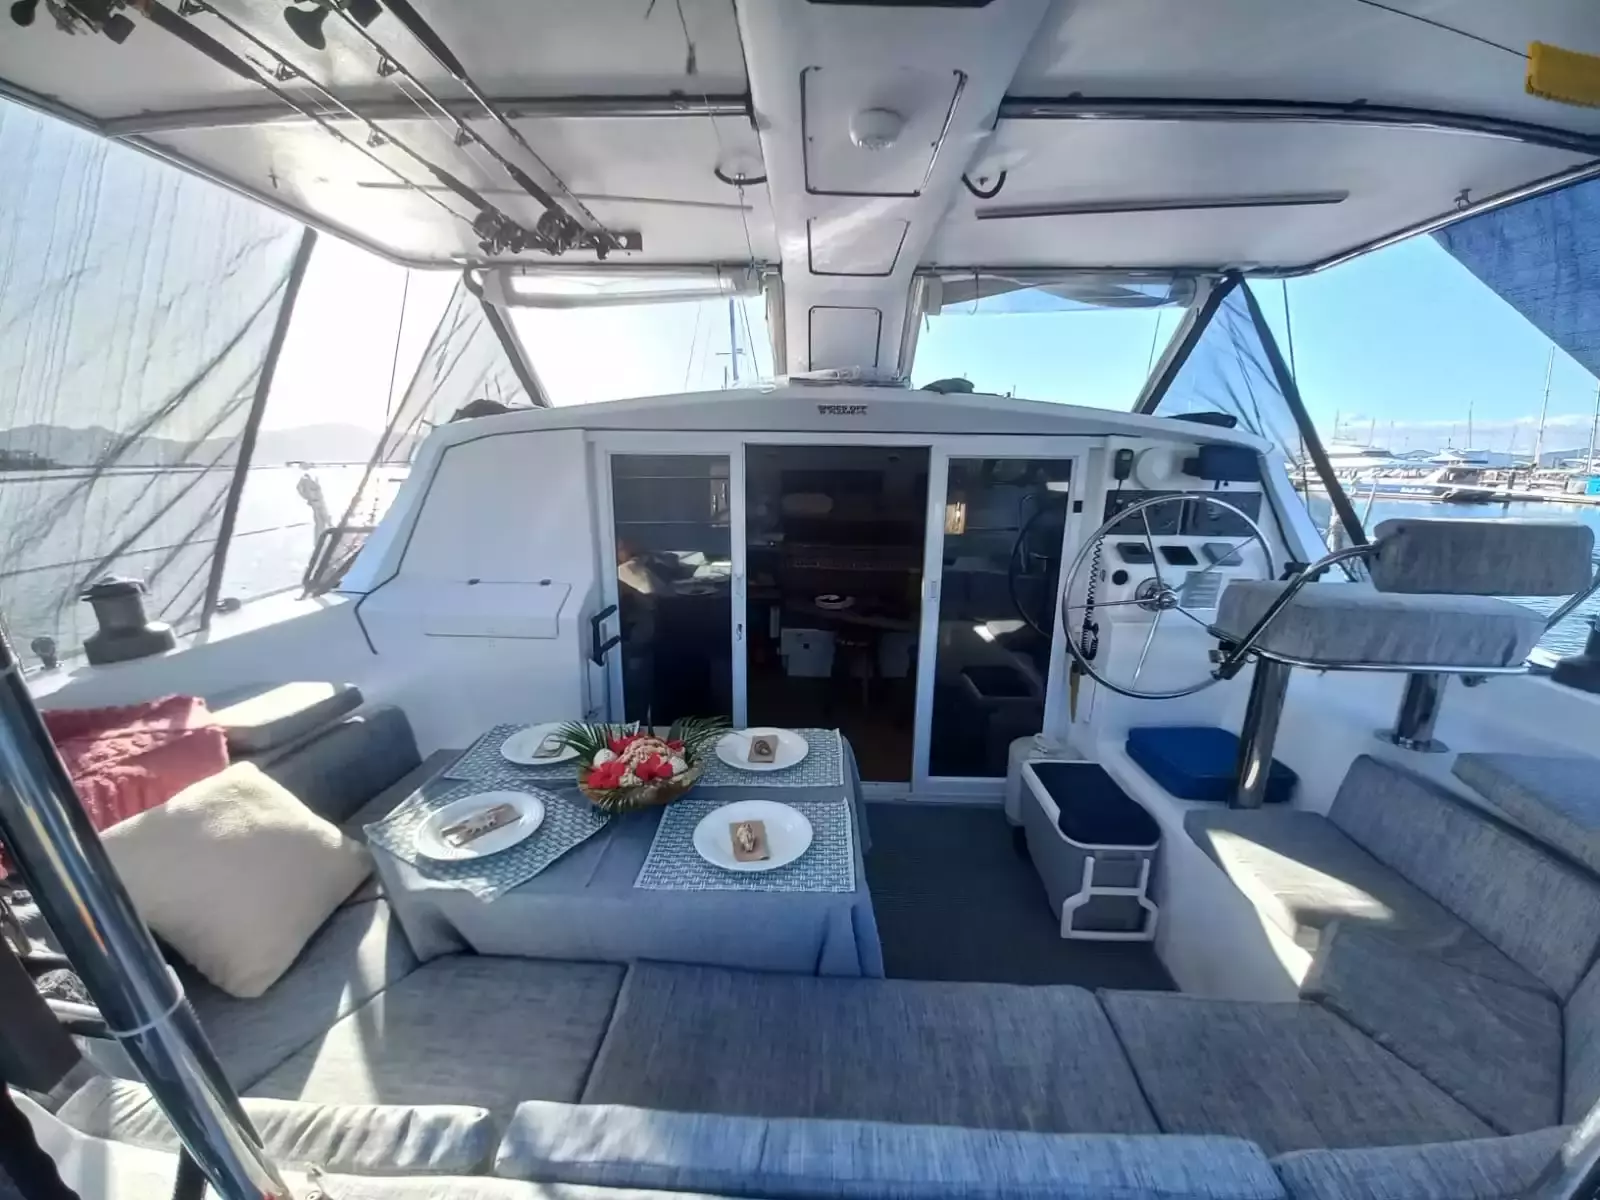 XXX by Knysna - Top rates for a Charter of a private Sailing Catamaran in Fiji